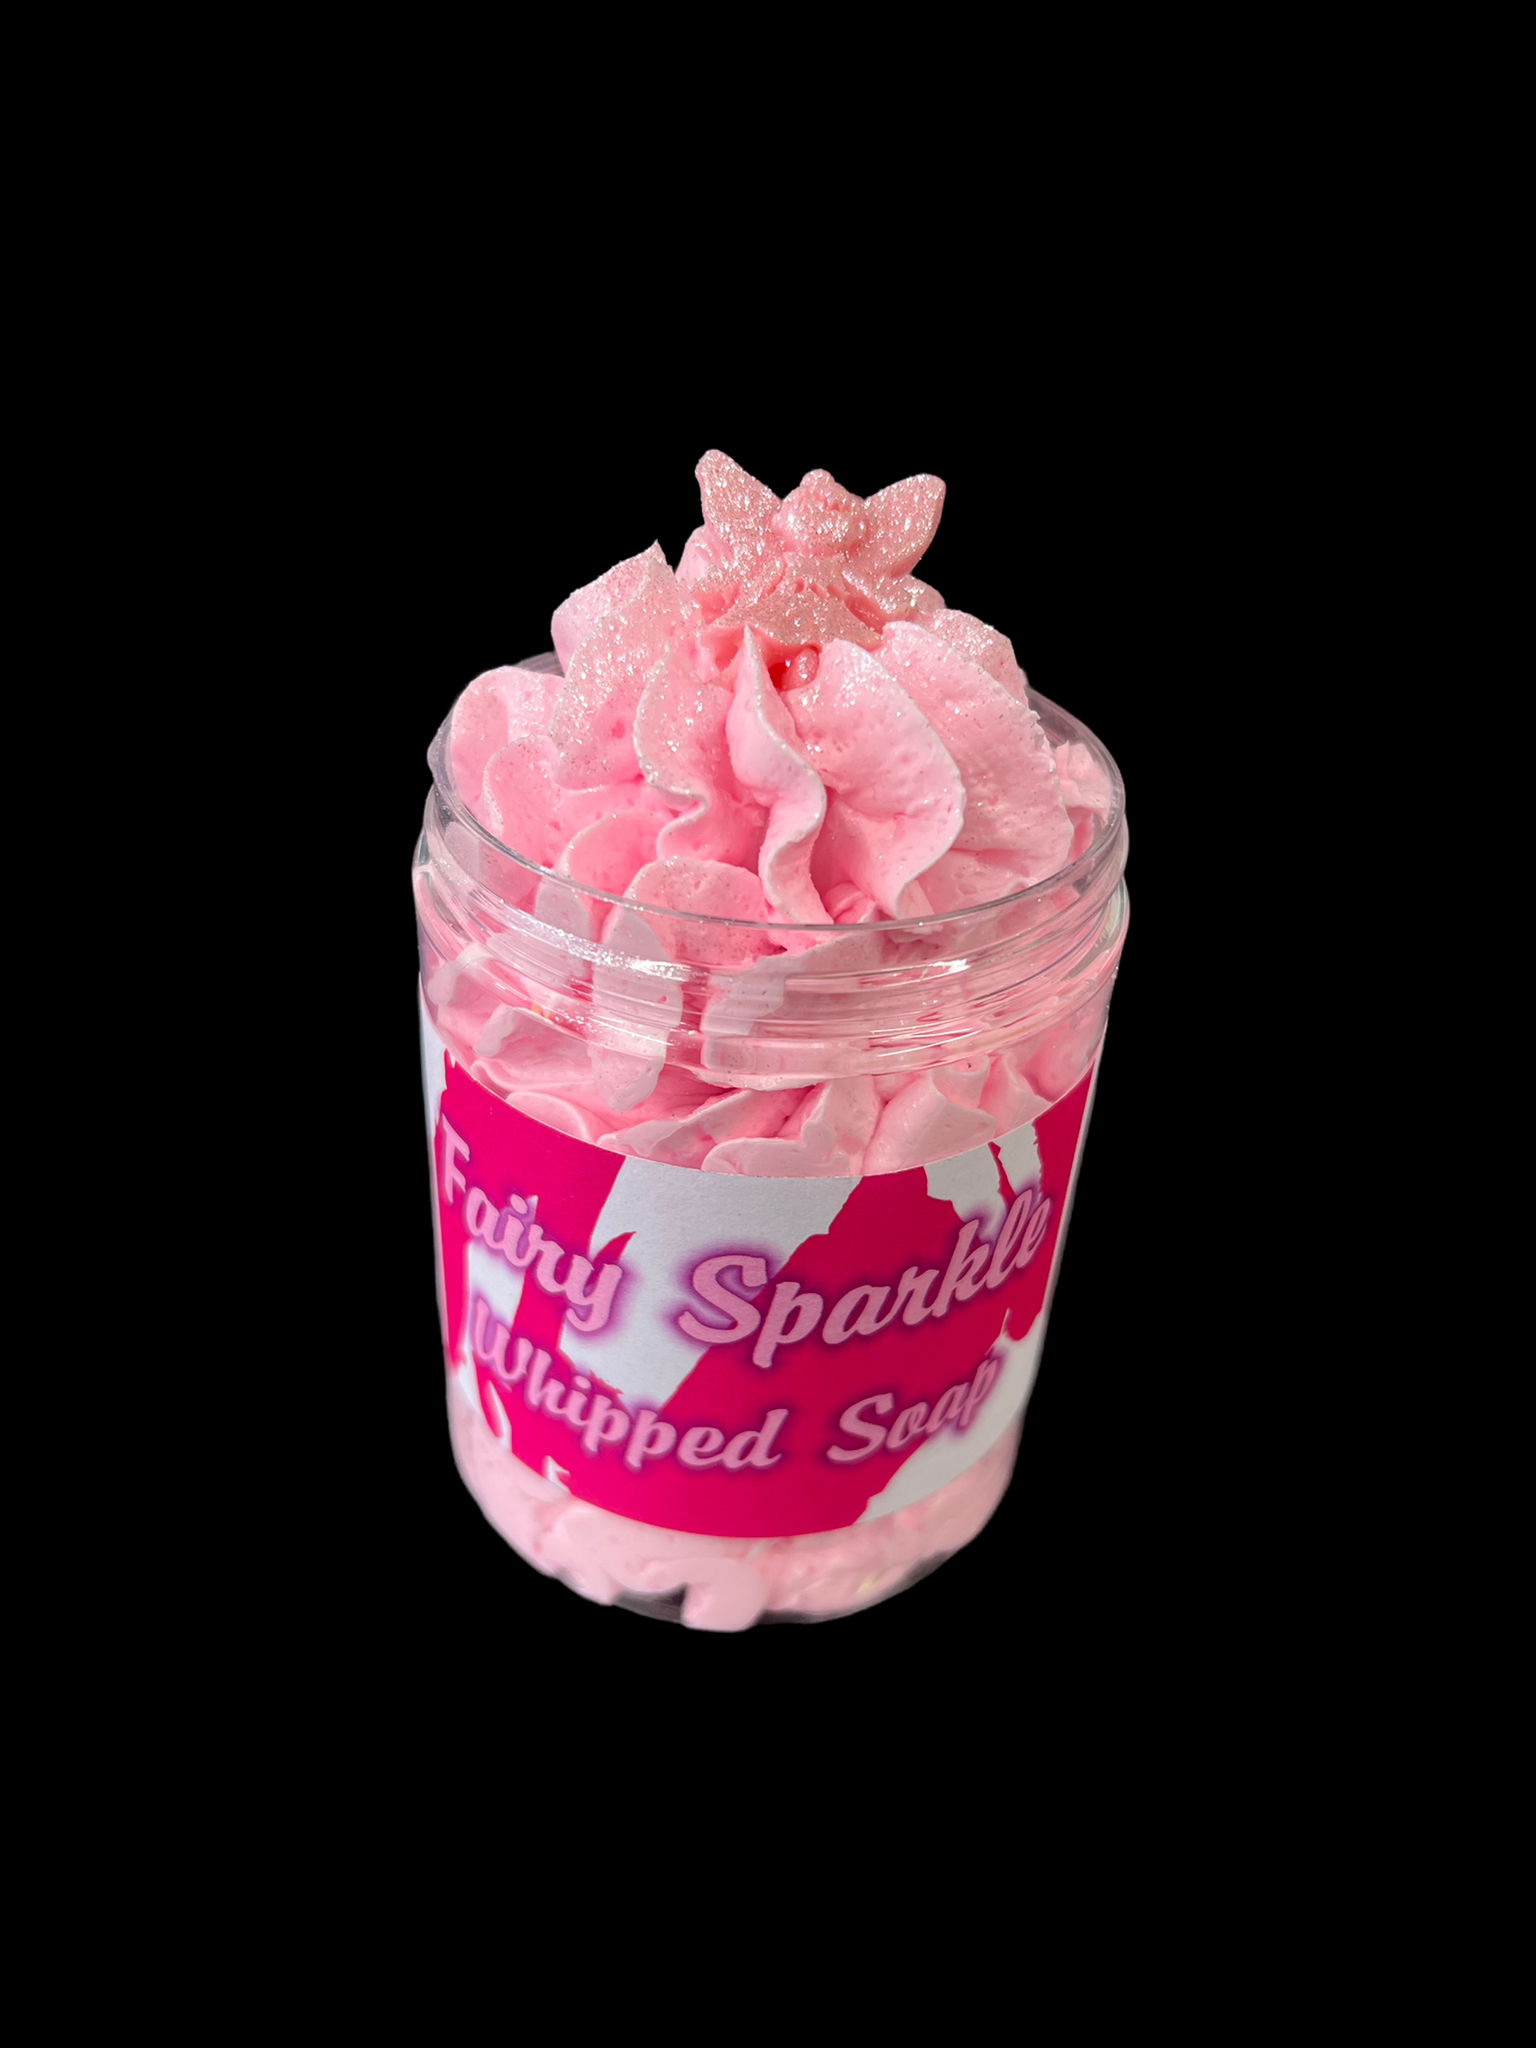 Fairy Drops scented whipped soap